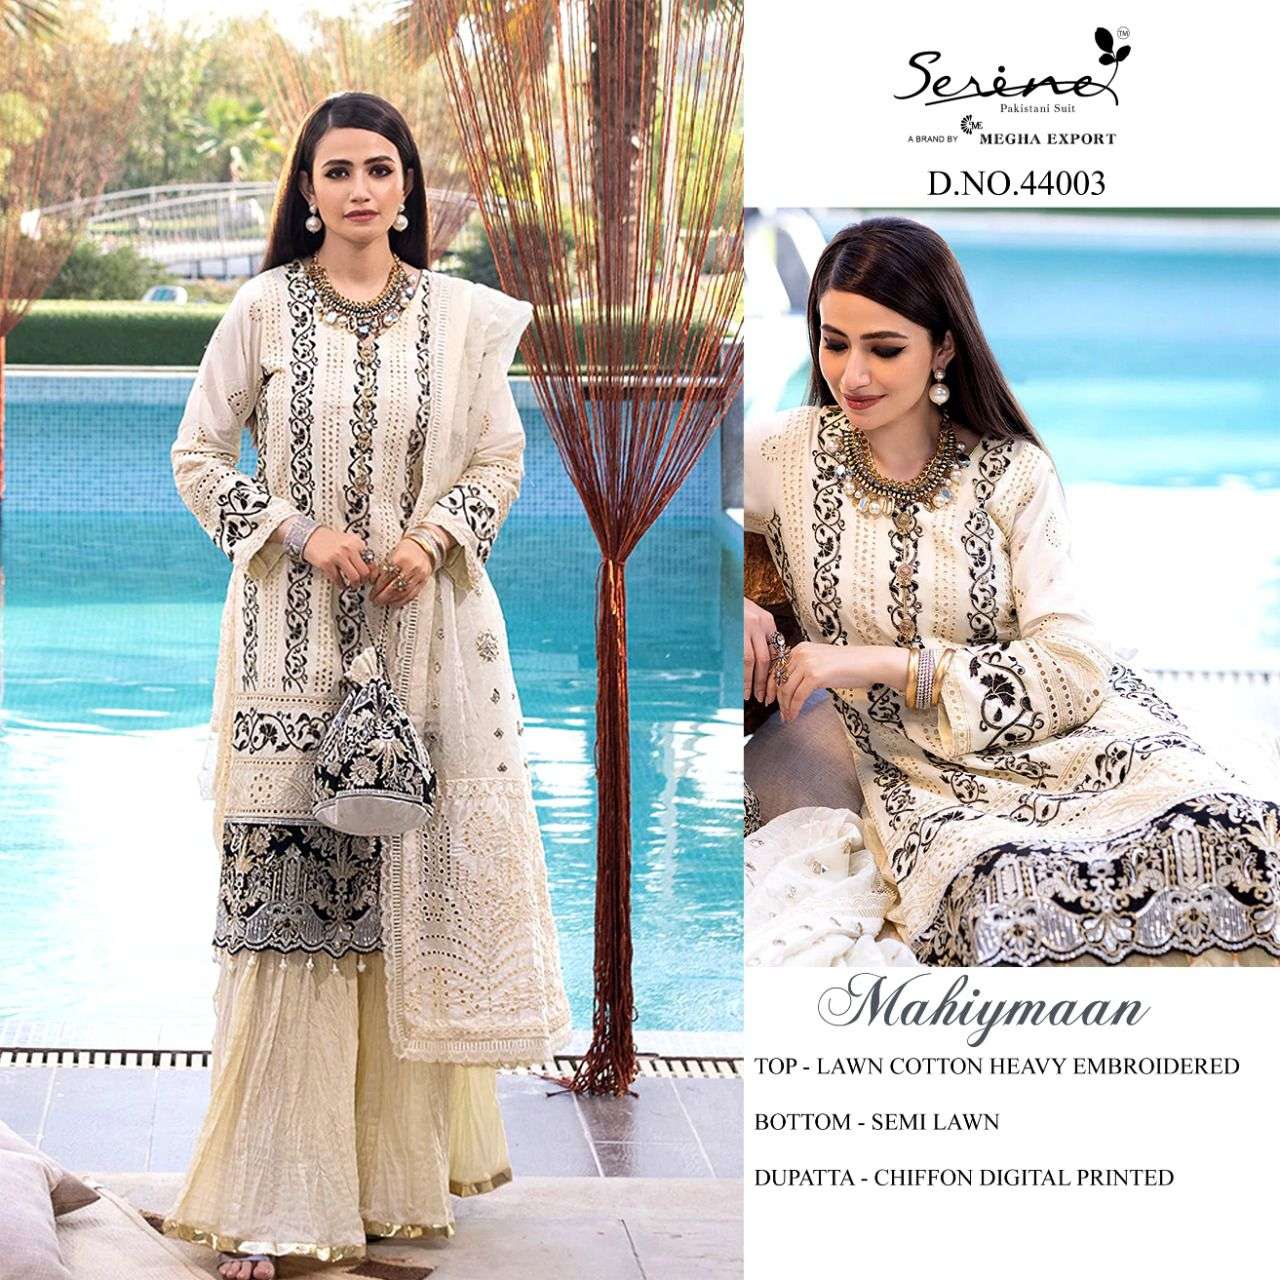 SERENE PRESENT MAHIYMAAN LAWN EMBROIDERED PAKISTANI DESIGNER SUITS IN WHOLESALE PRICE IN SURAT - SAI DRESSES